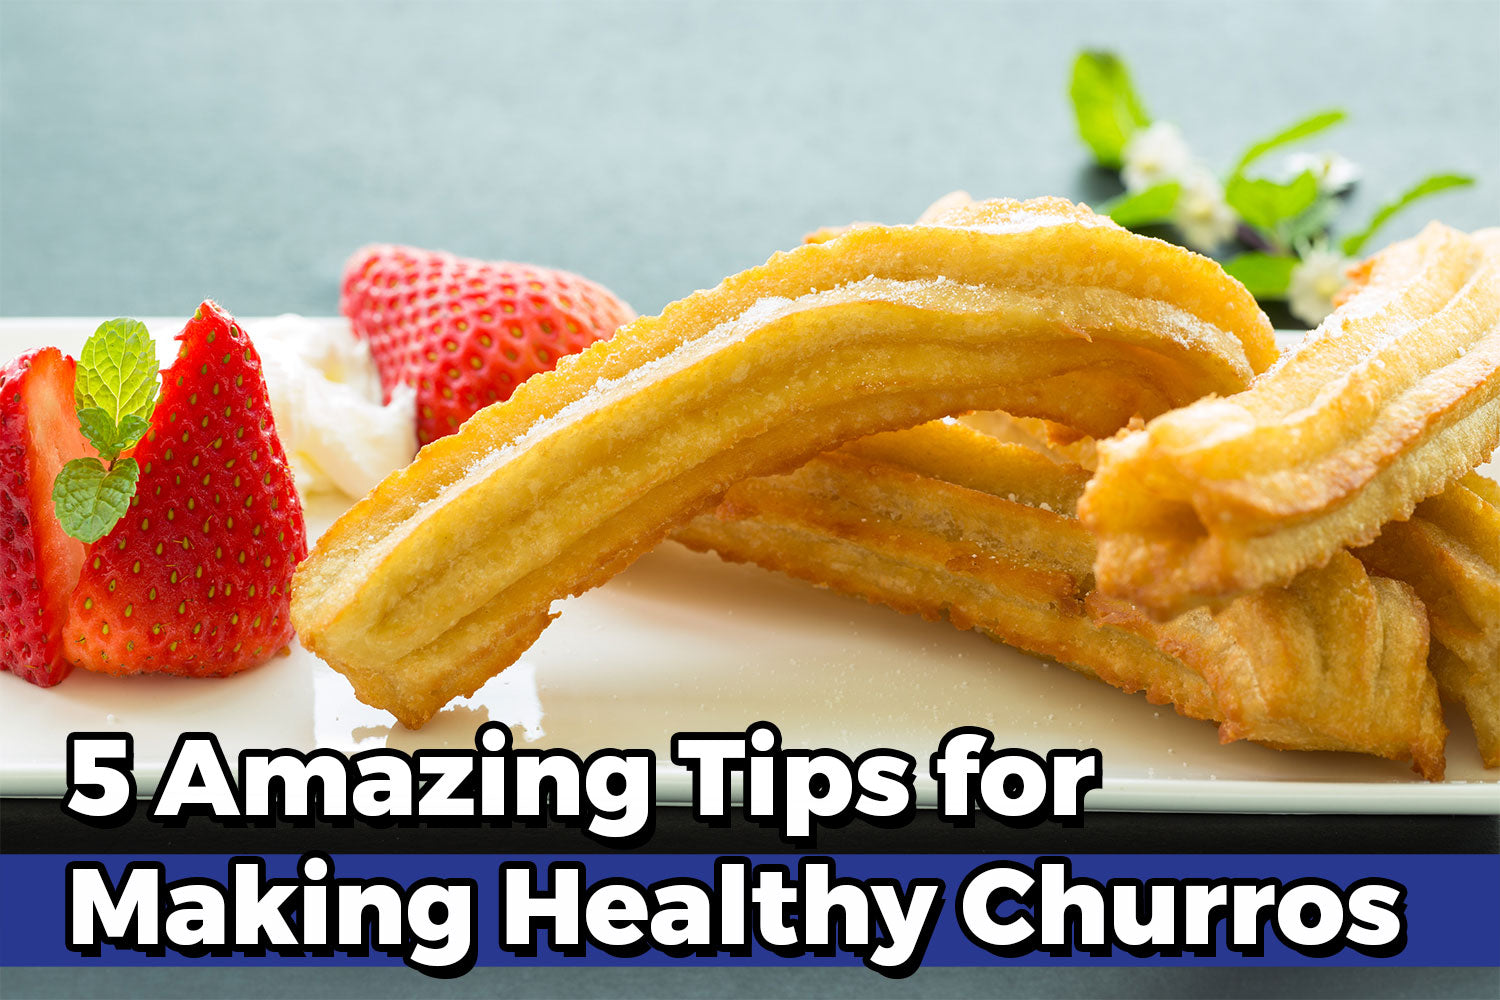 5 Amazing Tips for Making Healthy Churros